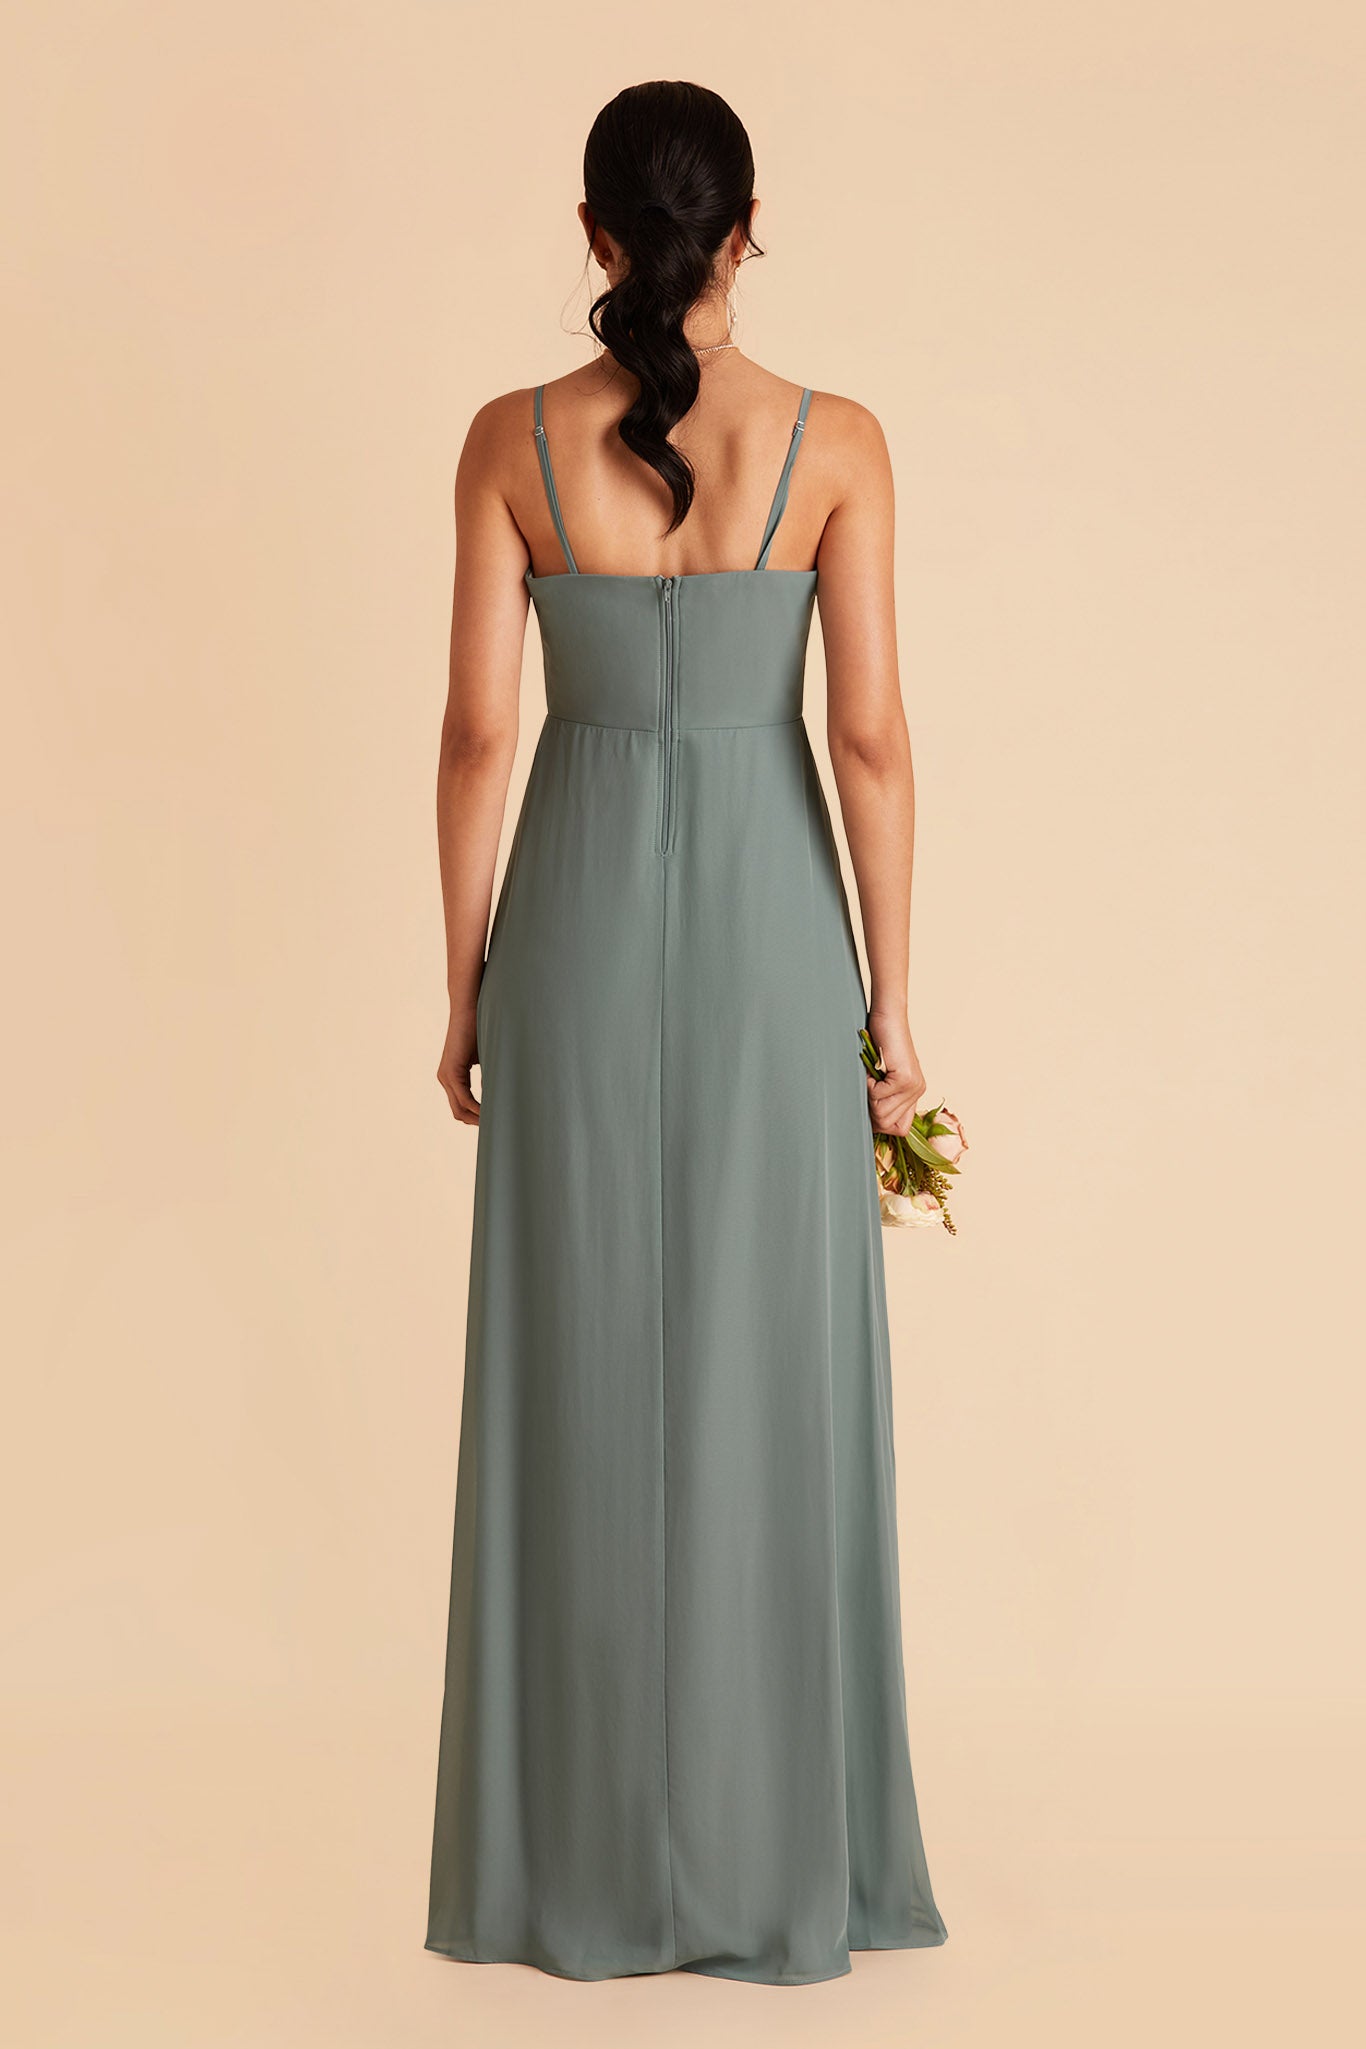 Chris bridesmaid dress with slit in sea glass chiffon by Birdy Grey, back view